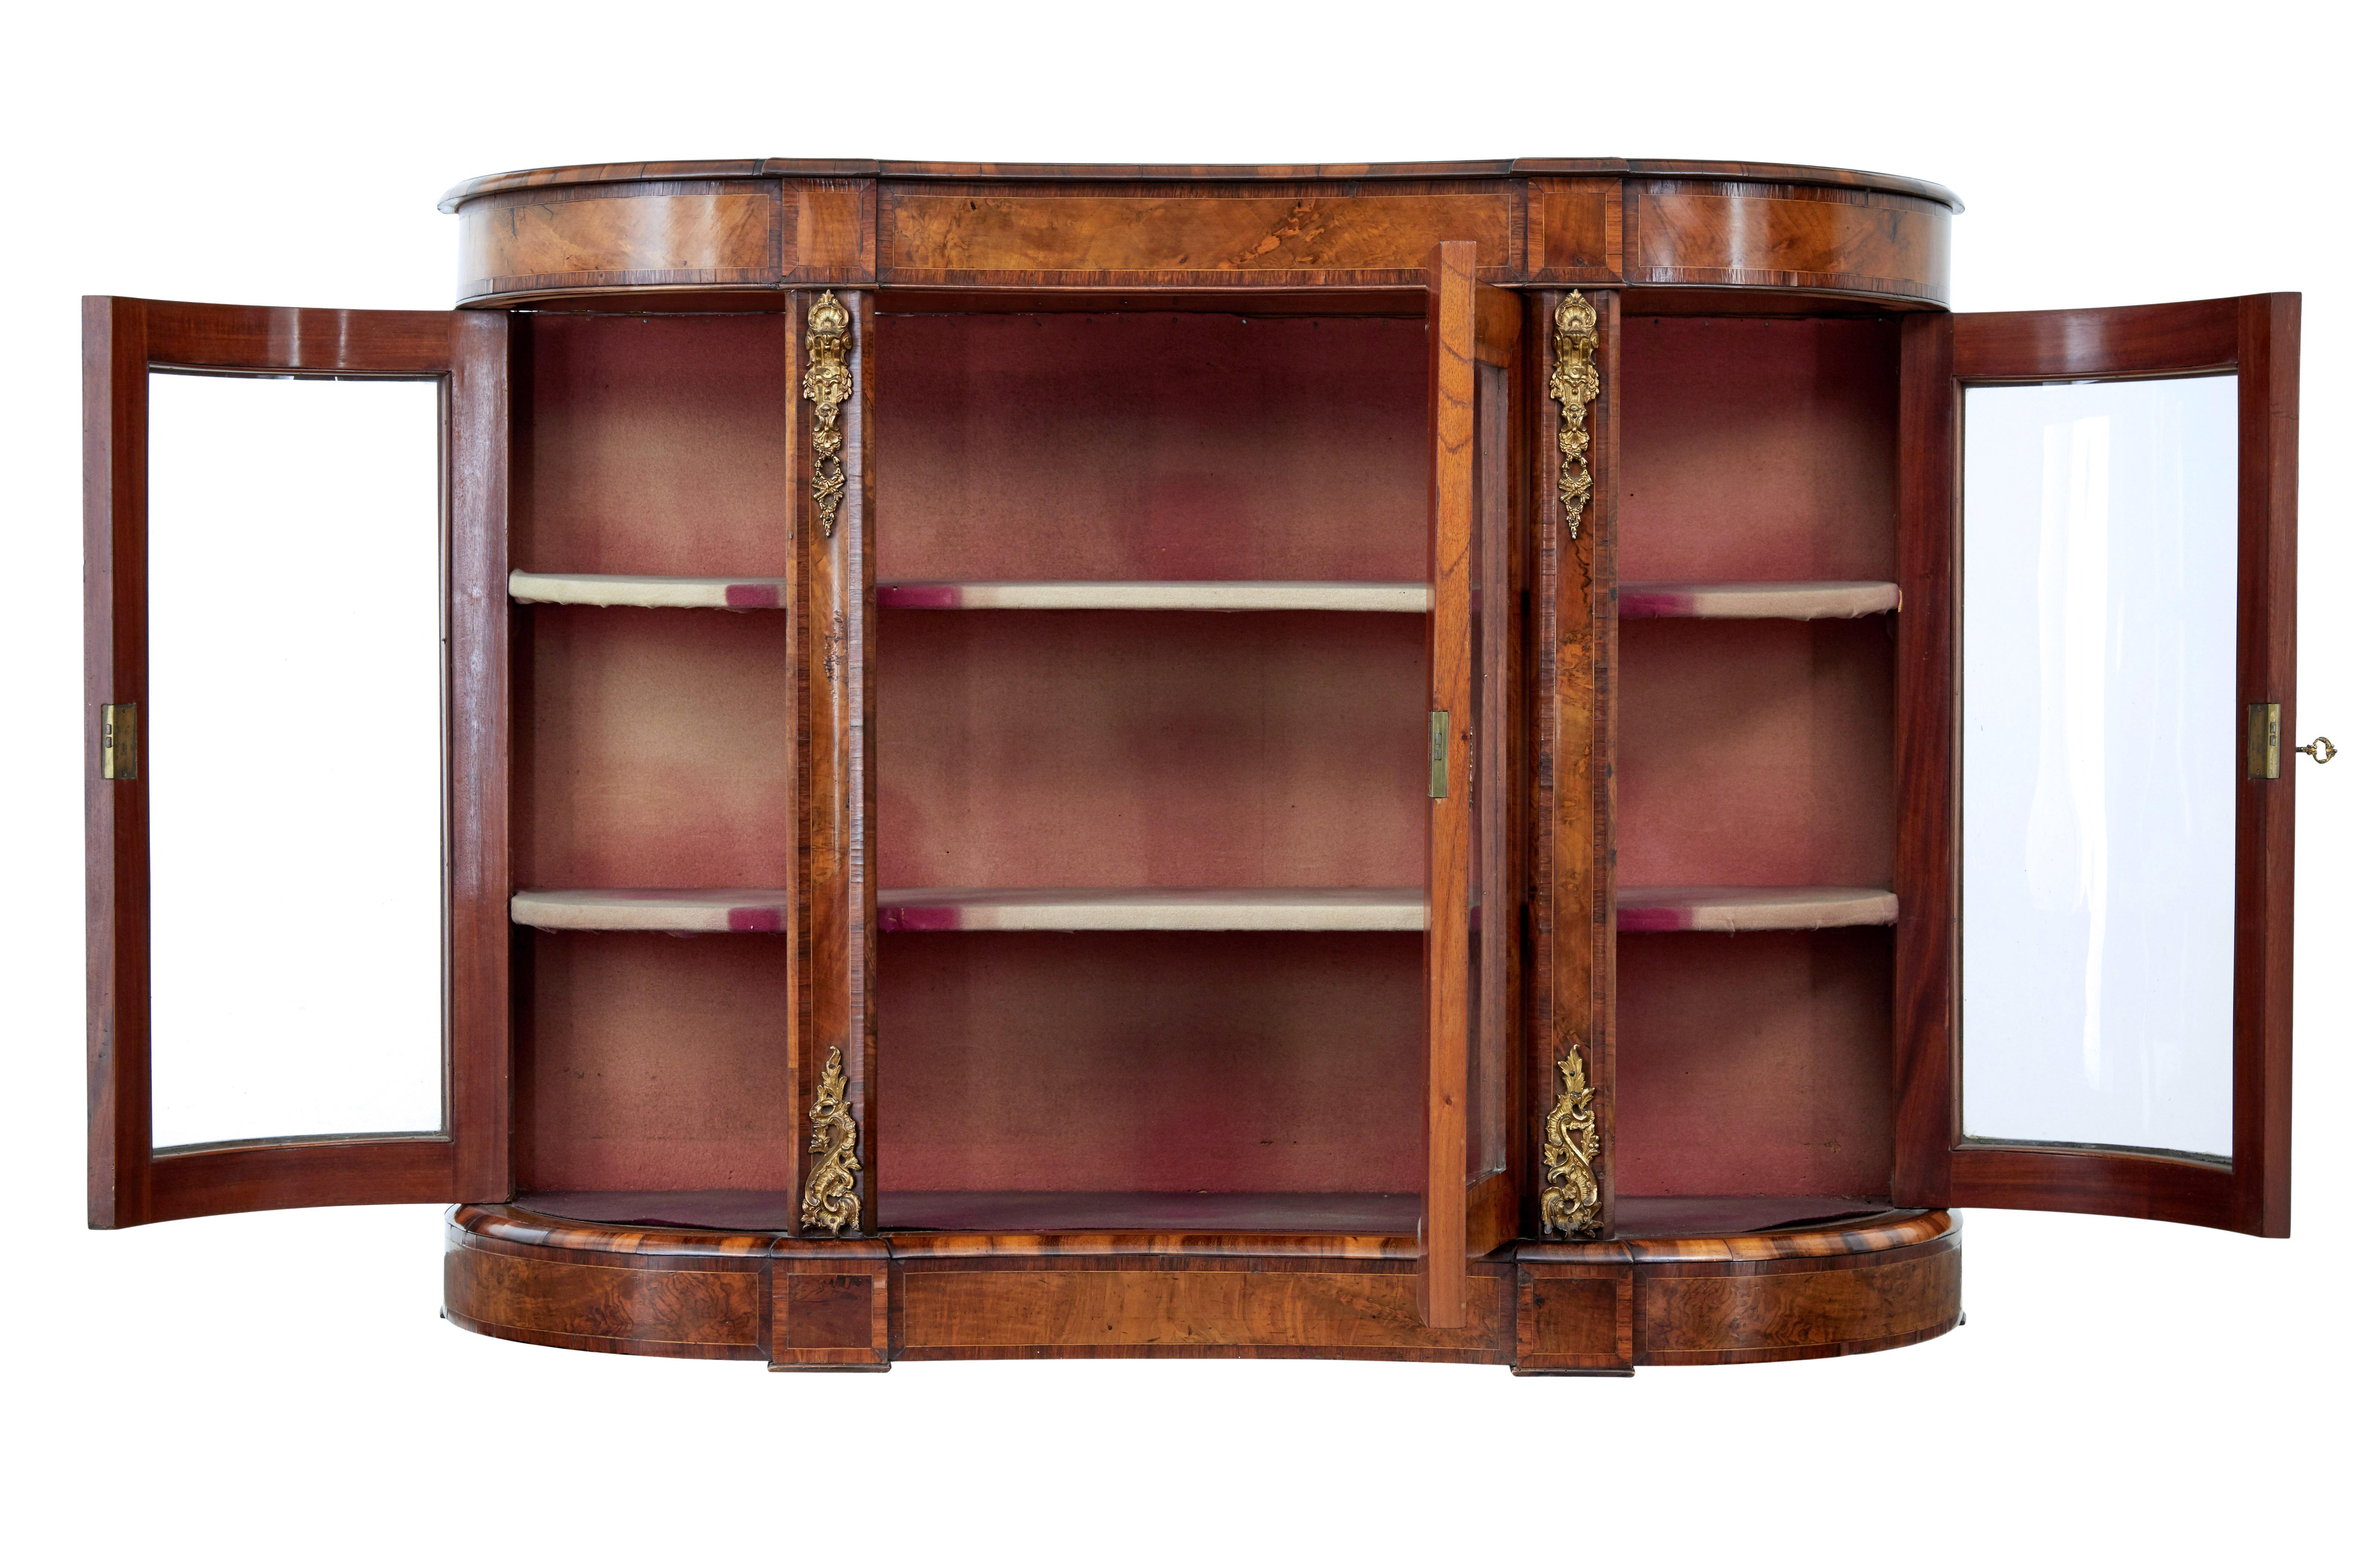 19th century victorian glazed walnut sideboard circa 1870.

Good quality high Victorian walnut credenza.

Beautifully shaped front with concave centre.  Central glazed door flanked either side by shaped doors each end.  Each containing 2 shelves for